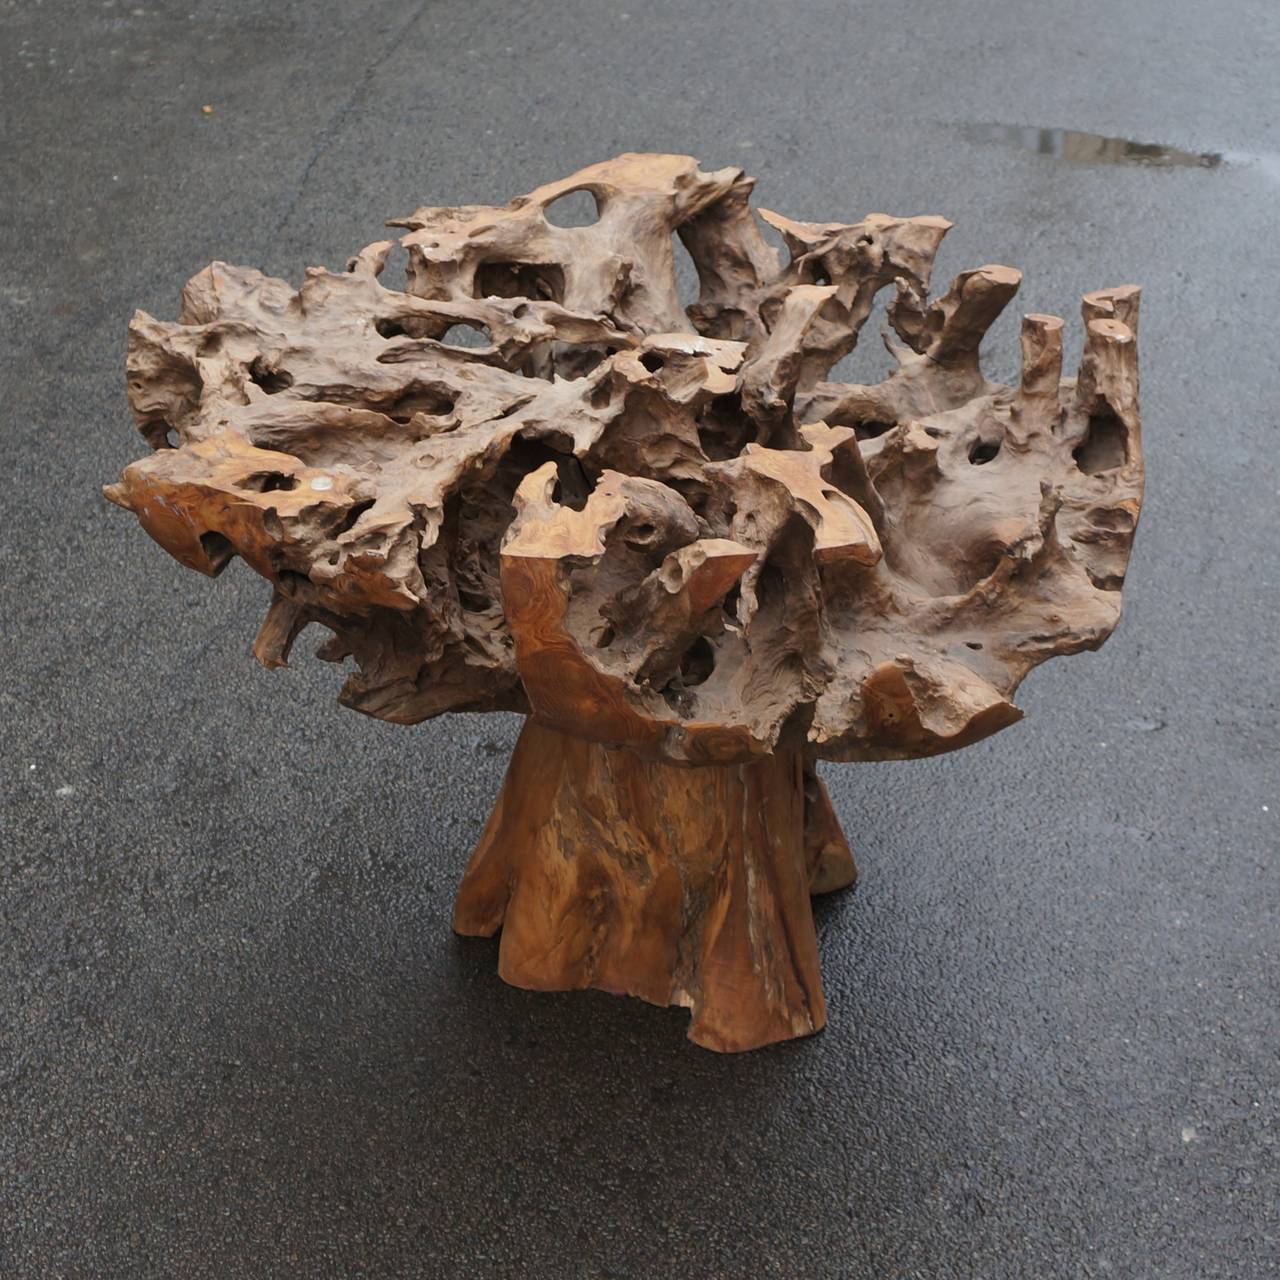 Glass-top burl wood and tree trunk table.
Glass:130 cm.